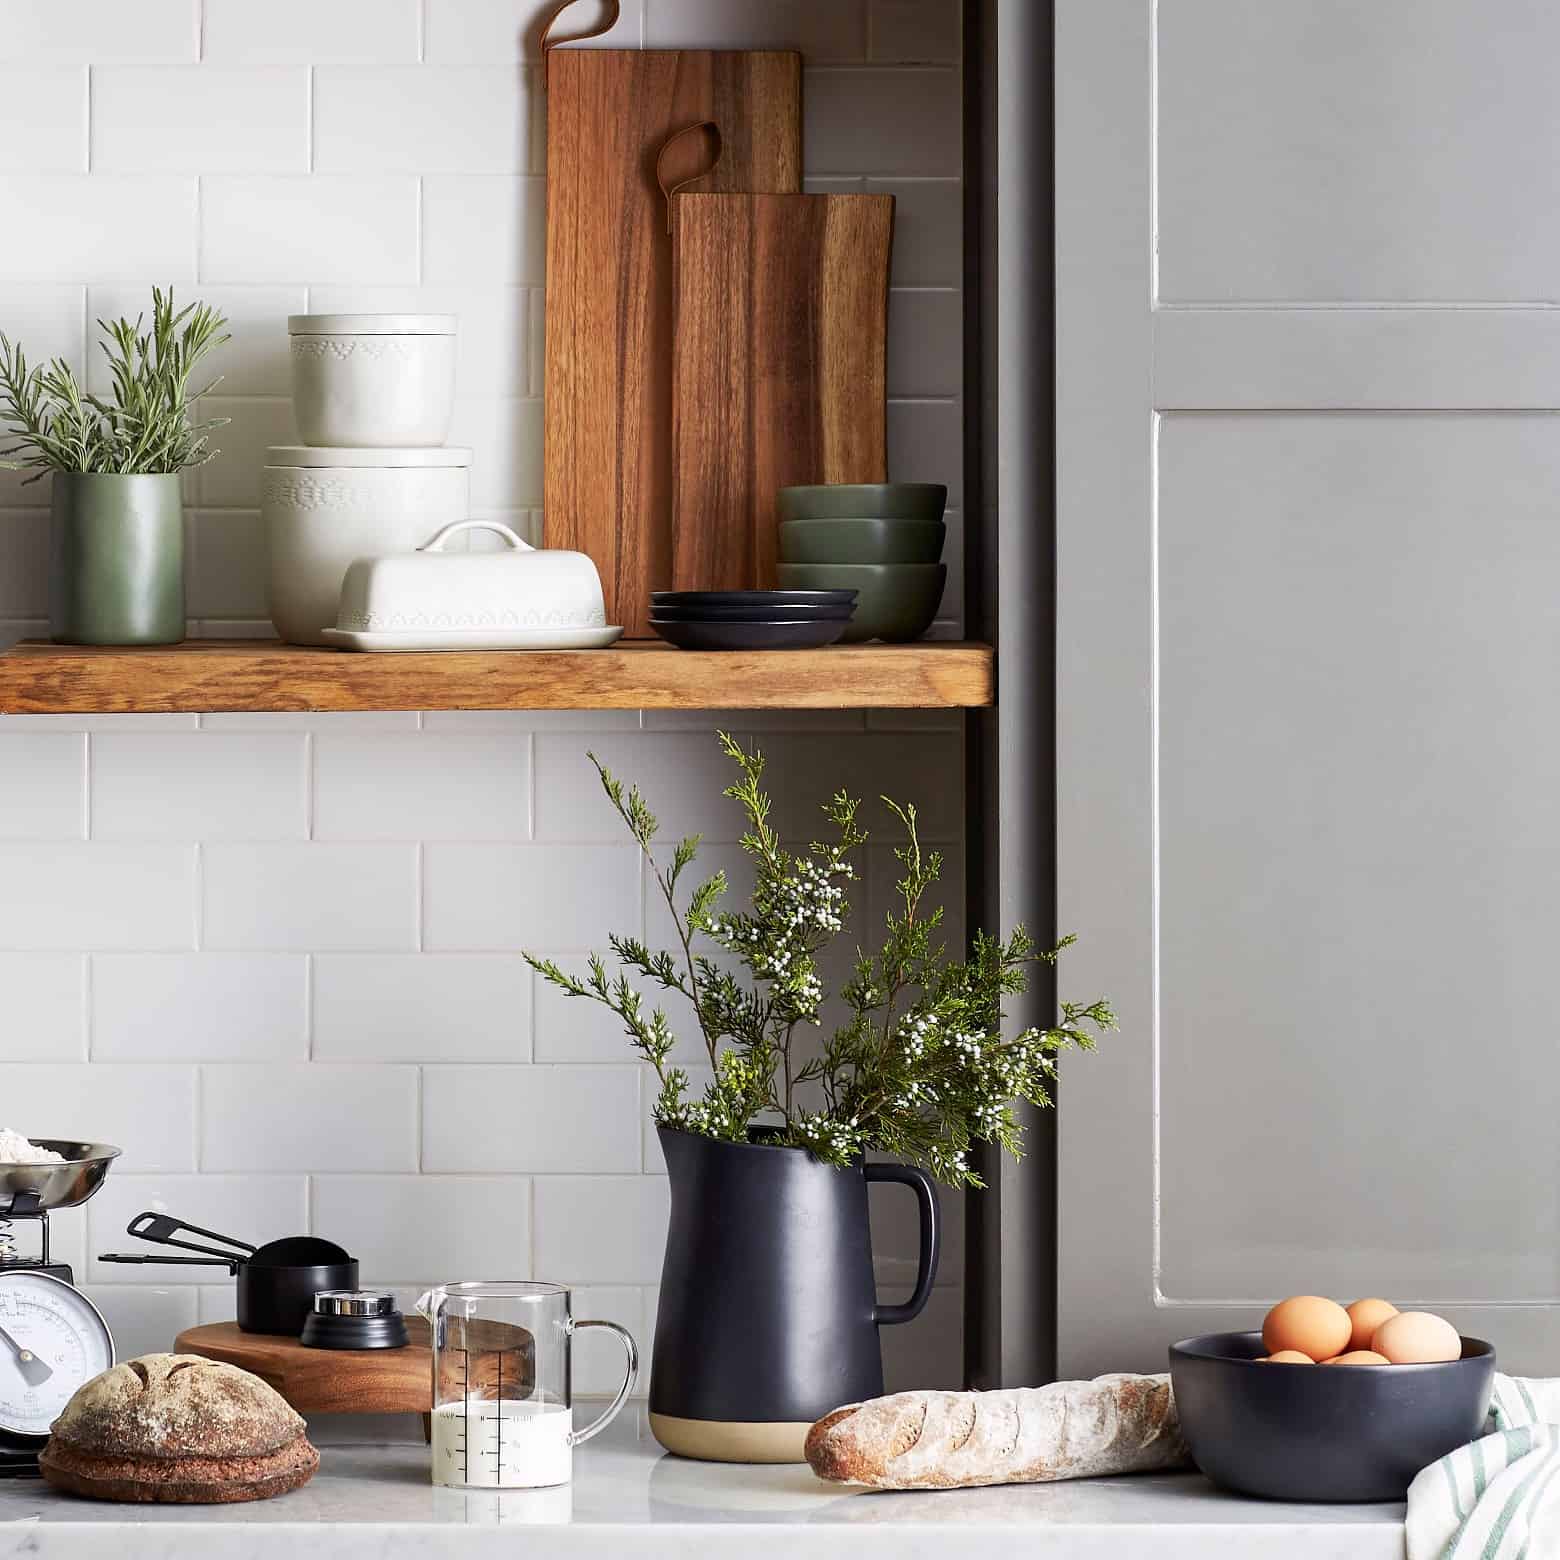 A kitchen with some utensils, bread, and plant decor.